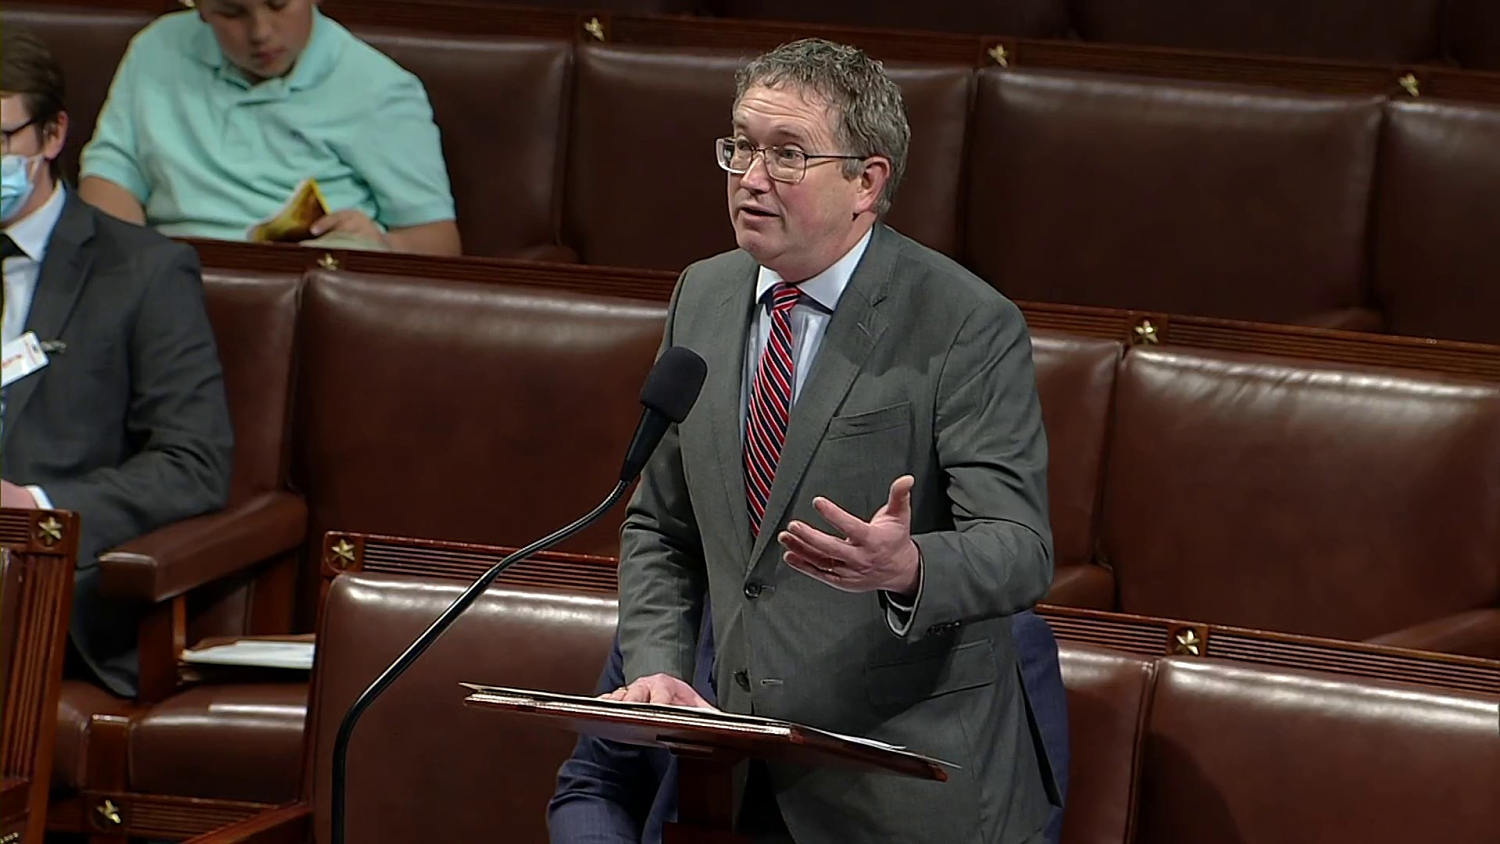 GOP Rep. Massie says TikTok bill would not address 'root problems'